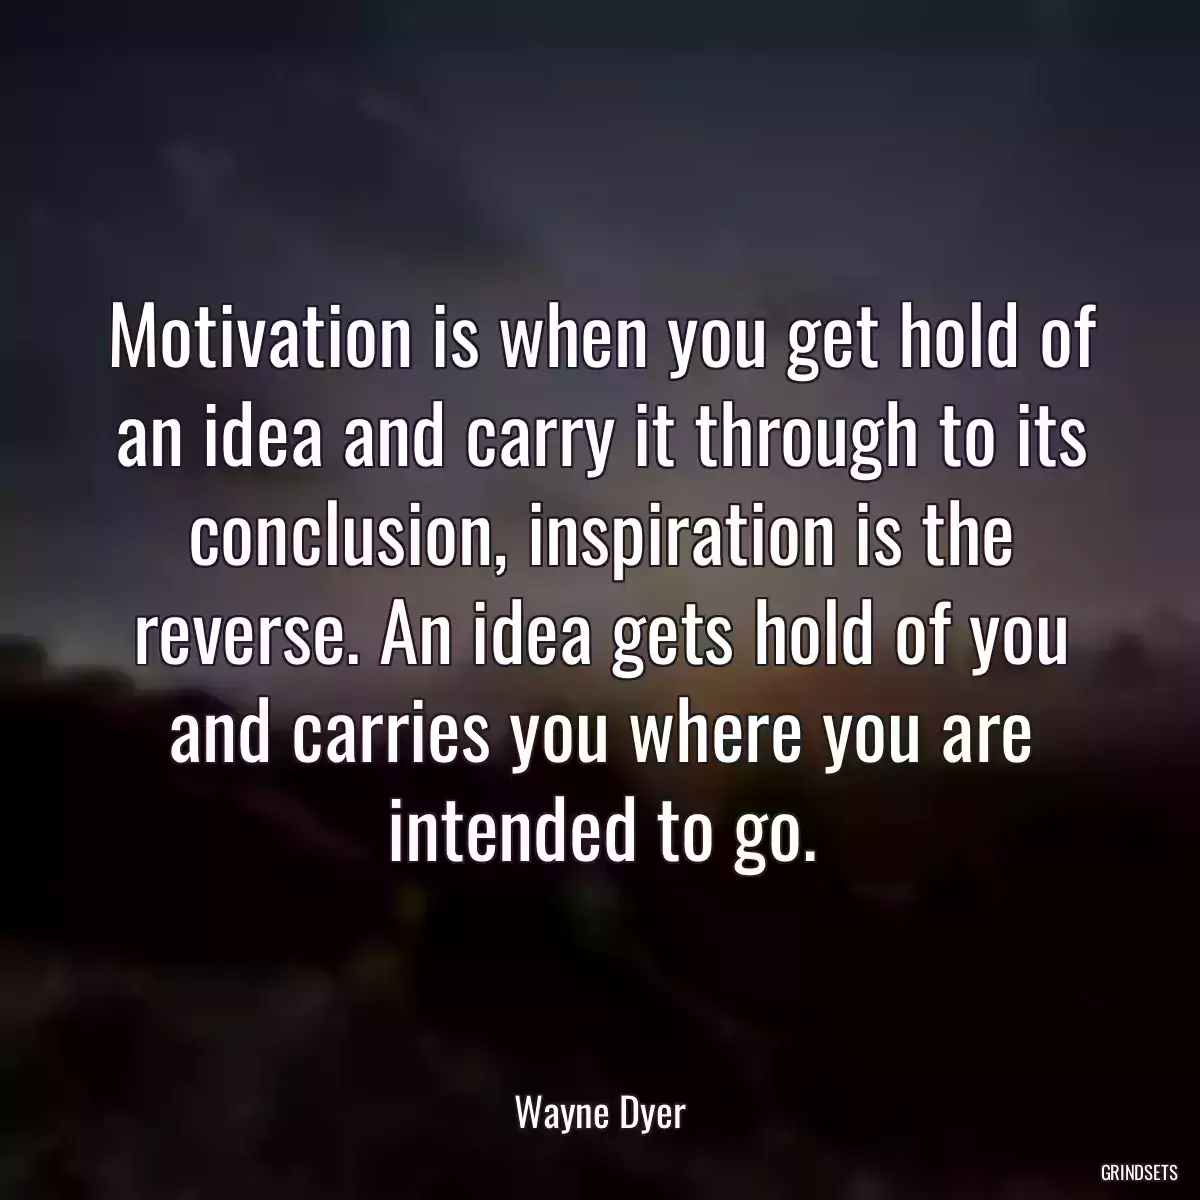 Motivation is when you get hold of an idea and carry it through to its conclusion, inspiration is the reverse. An idea gets hold of you and carries you where you are intended to go.